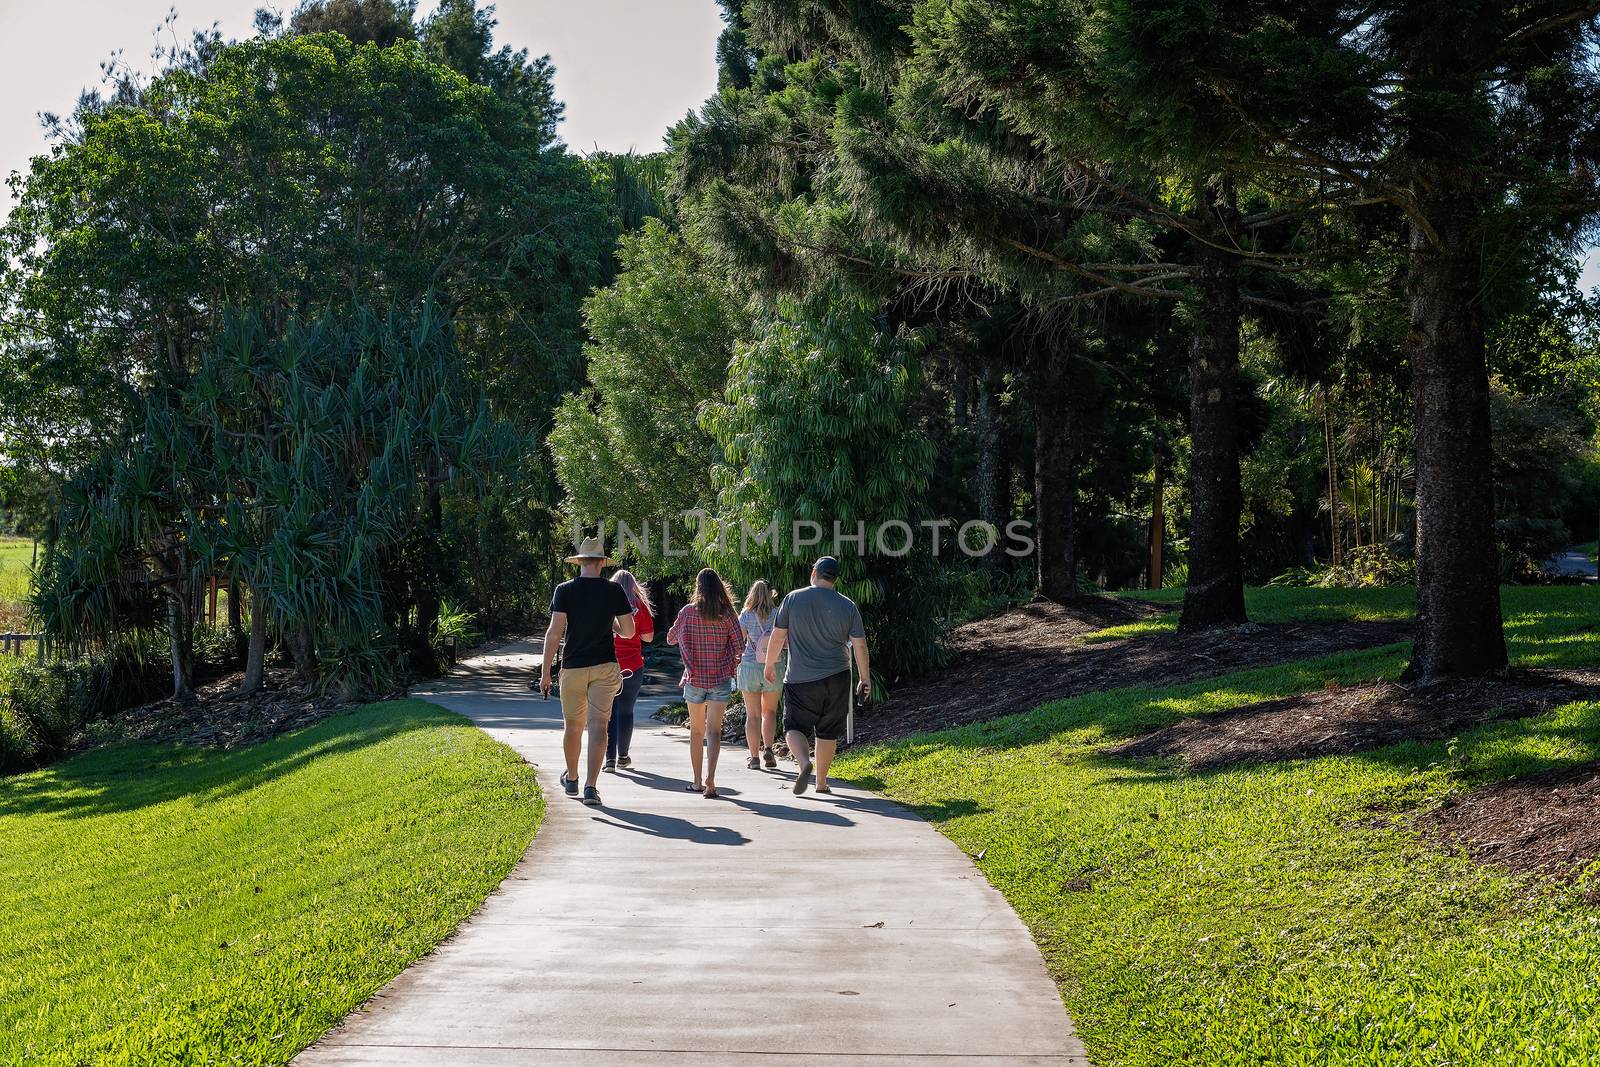 People out walking in the park after the lifting of isolation restrictions